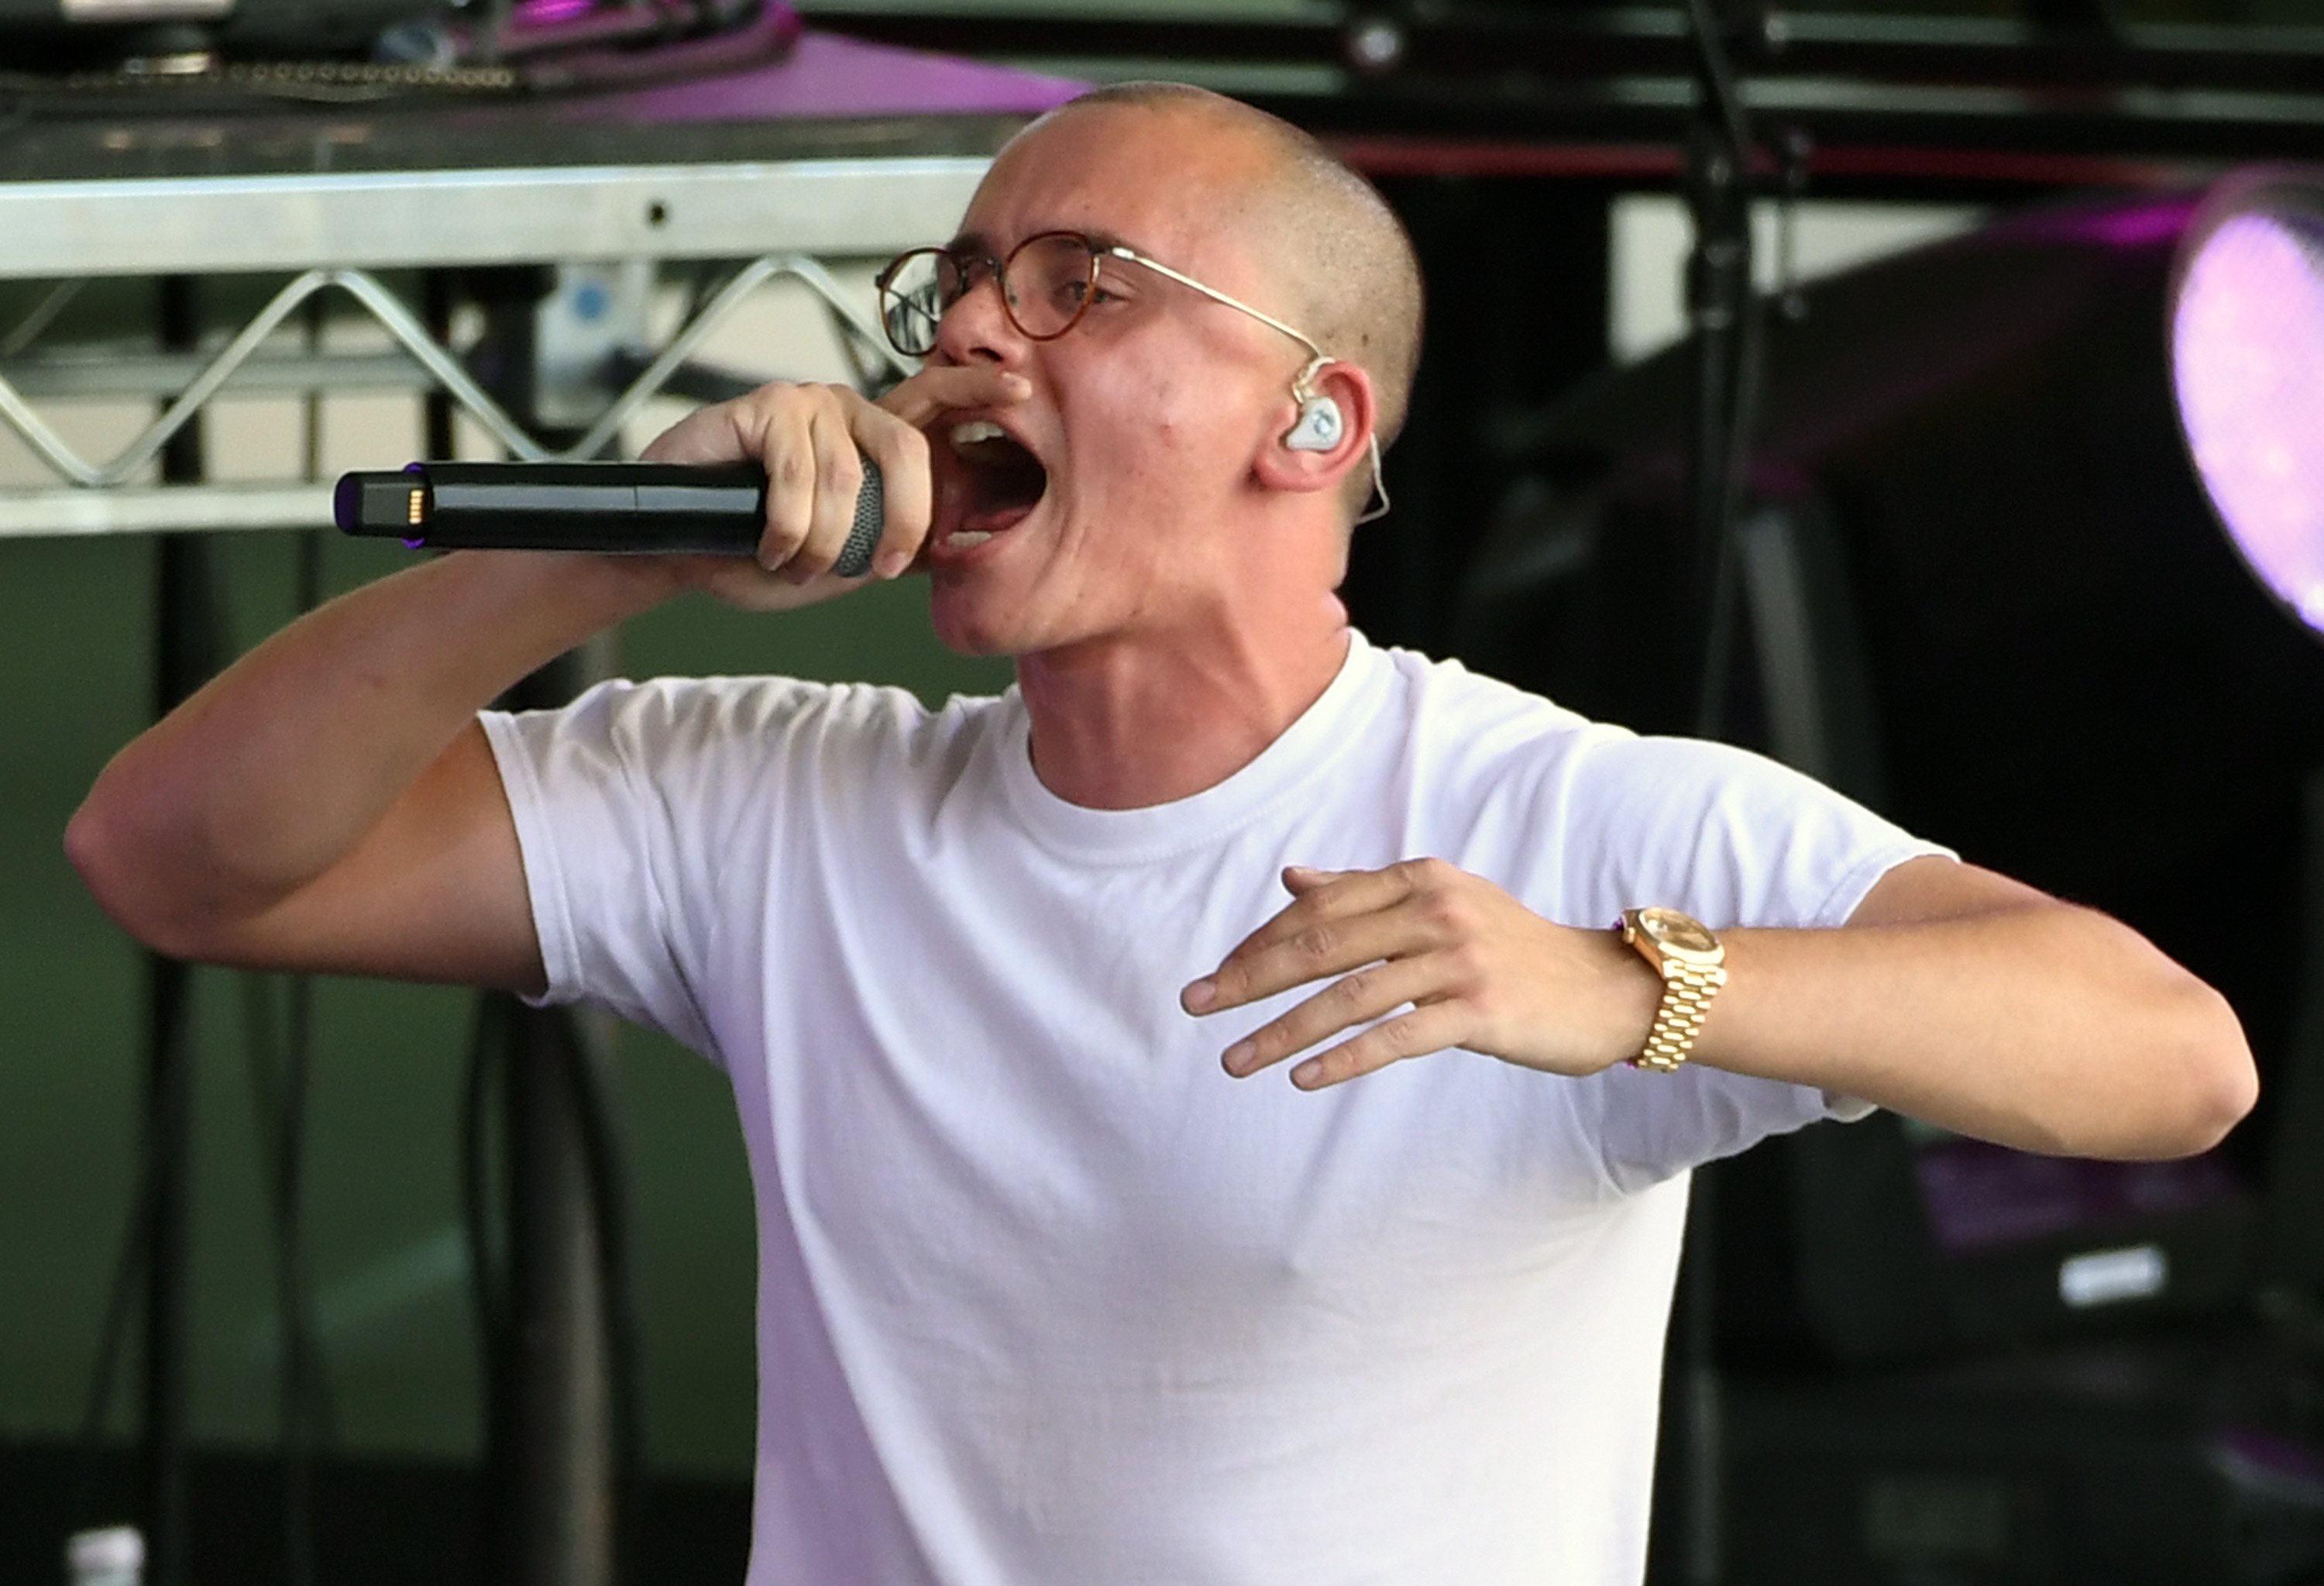 Logic Was “F***ing With Everybody” When He Threatened Retirement